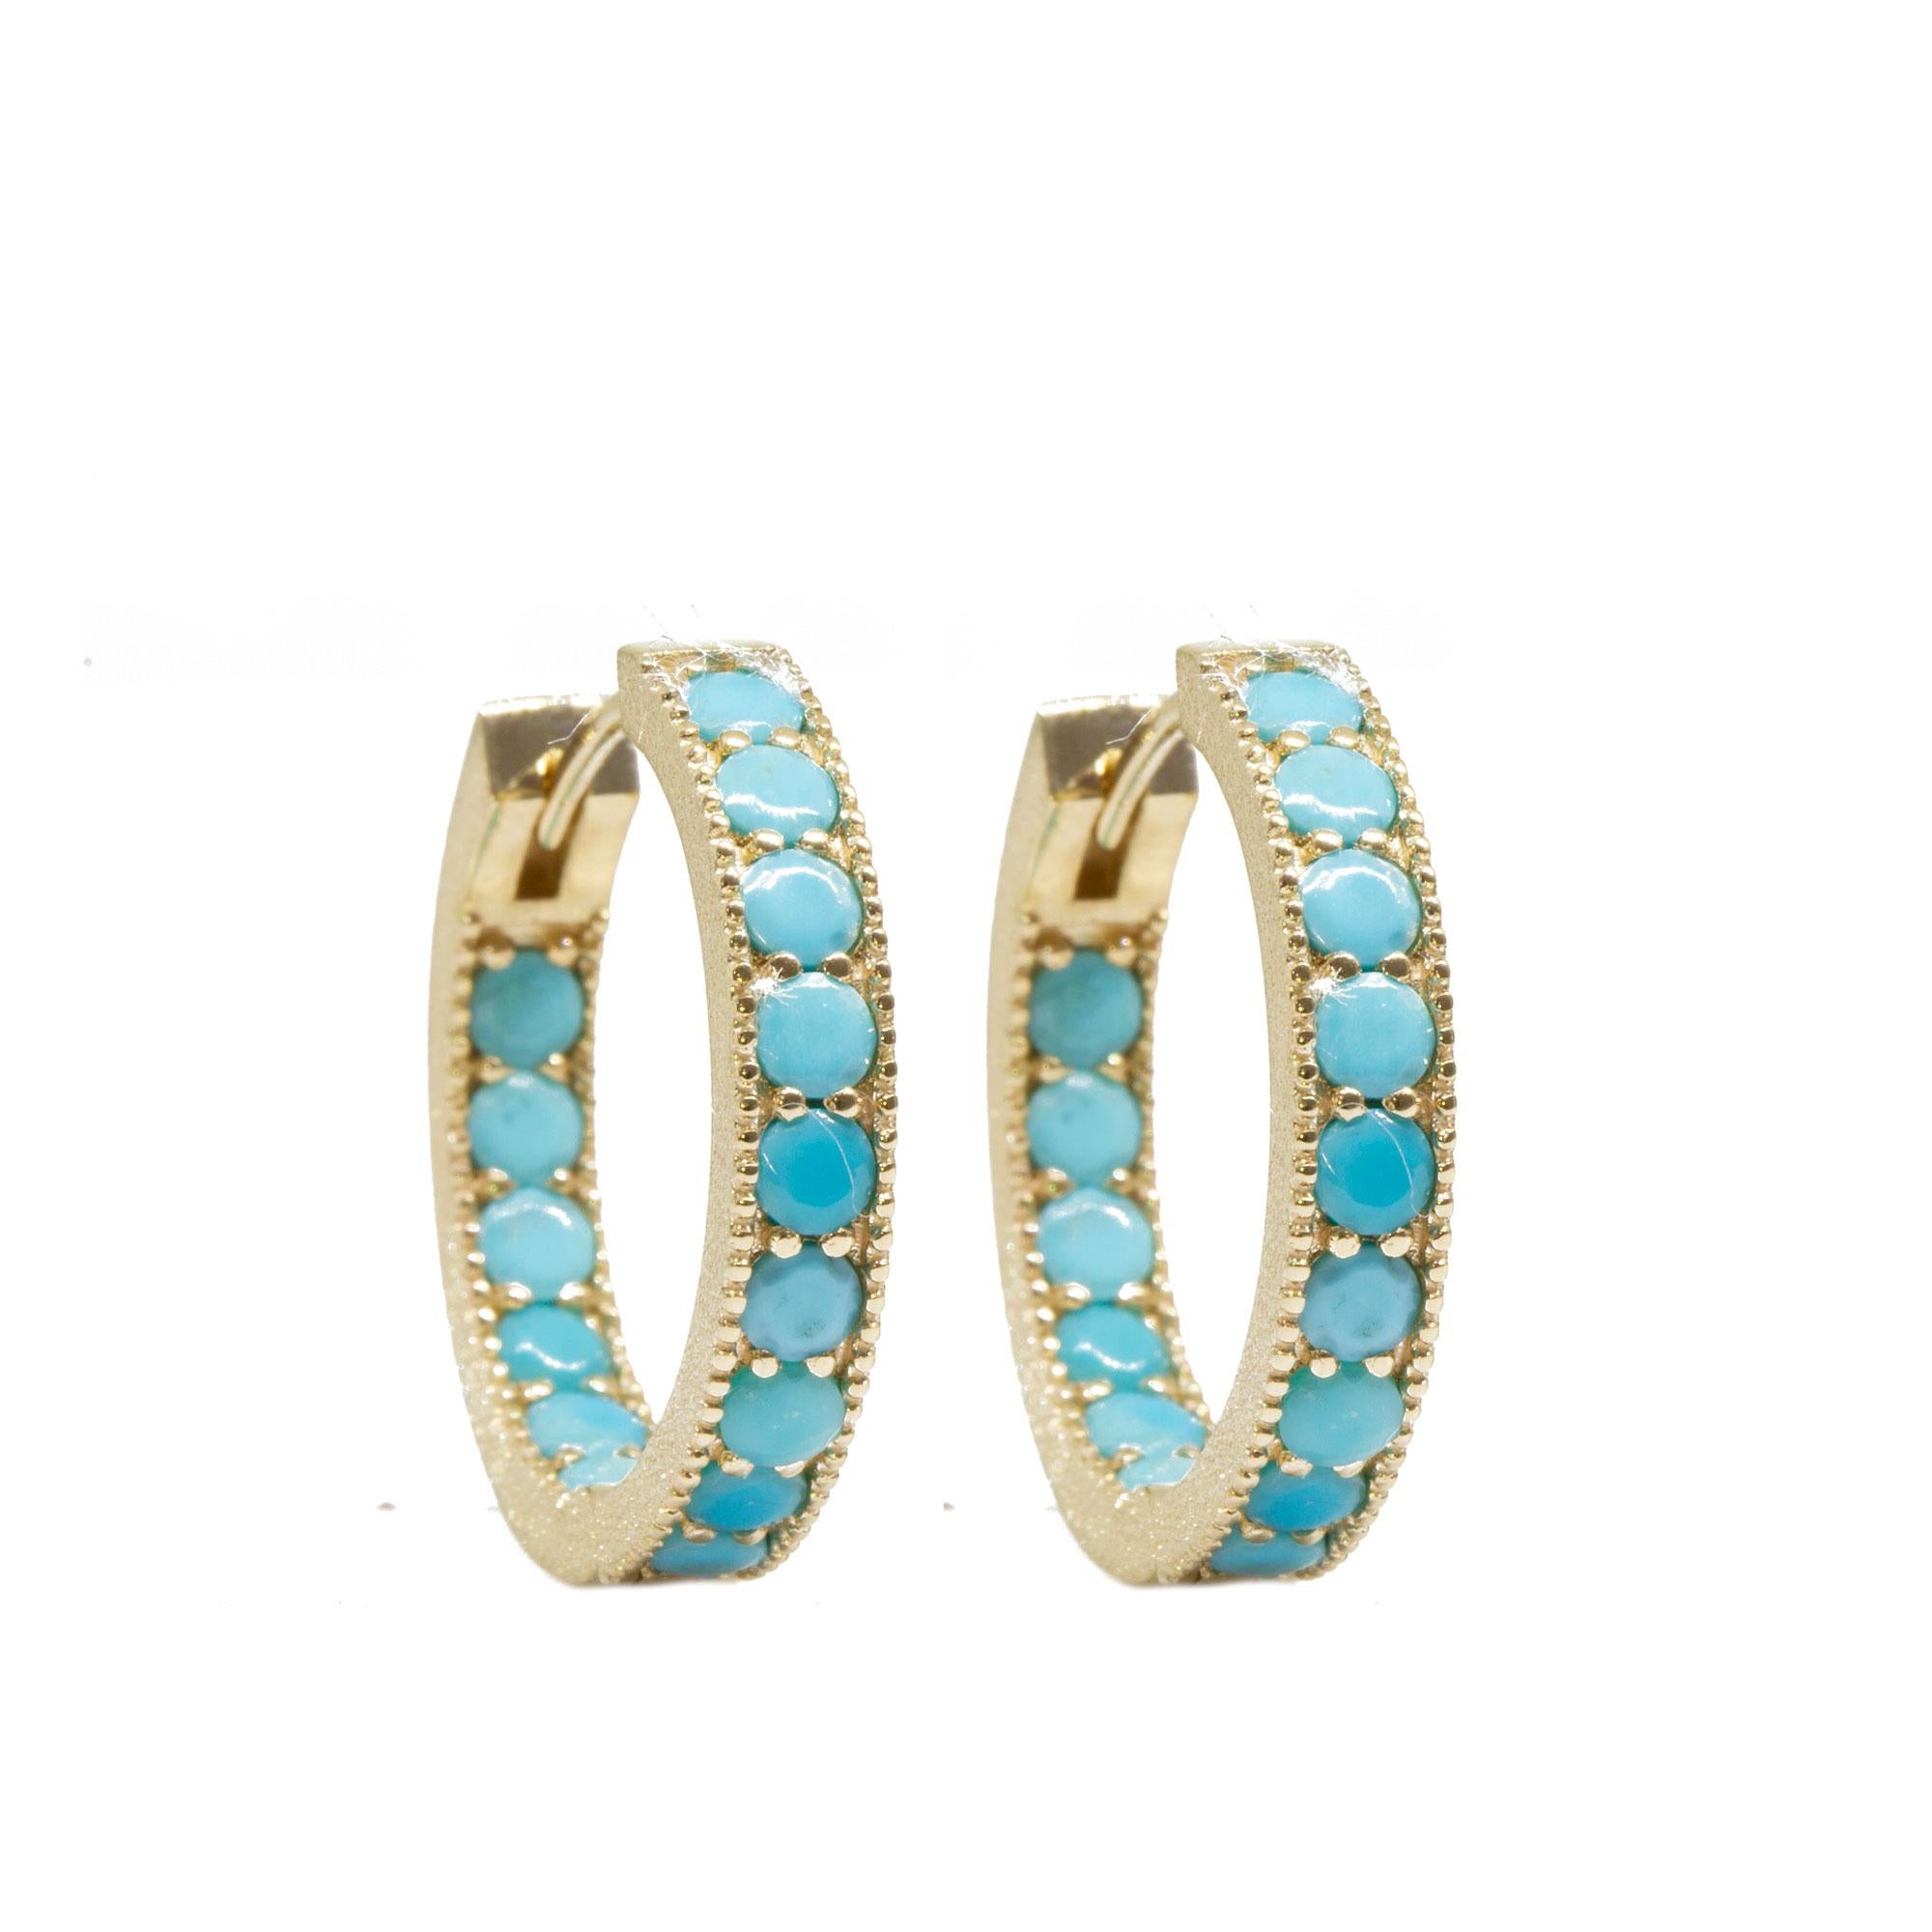 Contemporary Mia Medium Turquoise Charms and Intricate 18 Karat Gold Hoop Earrings For Sale